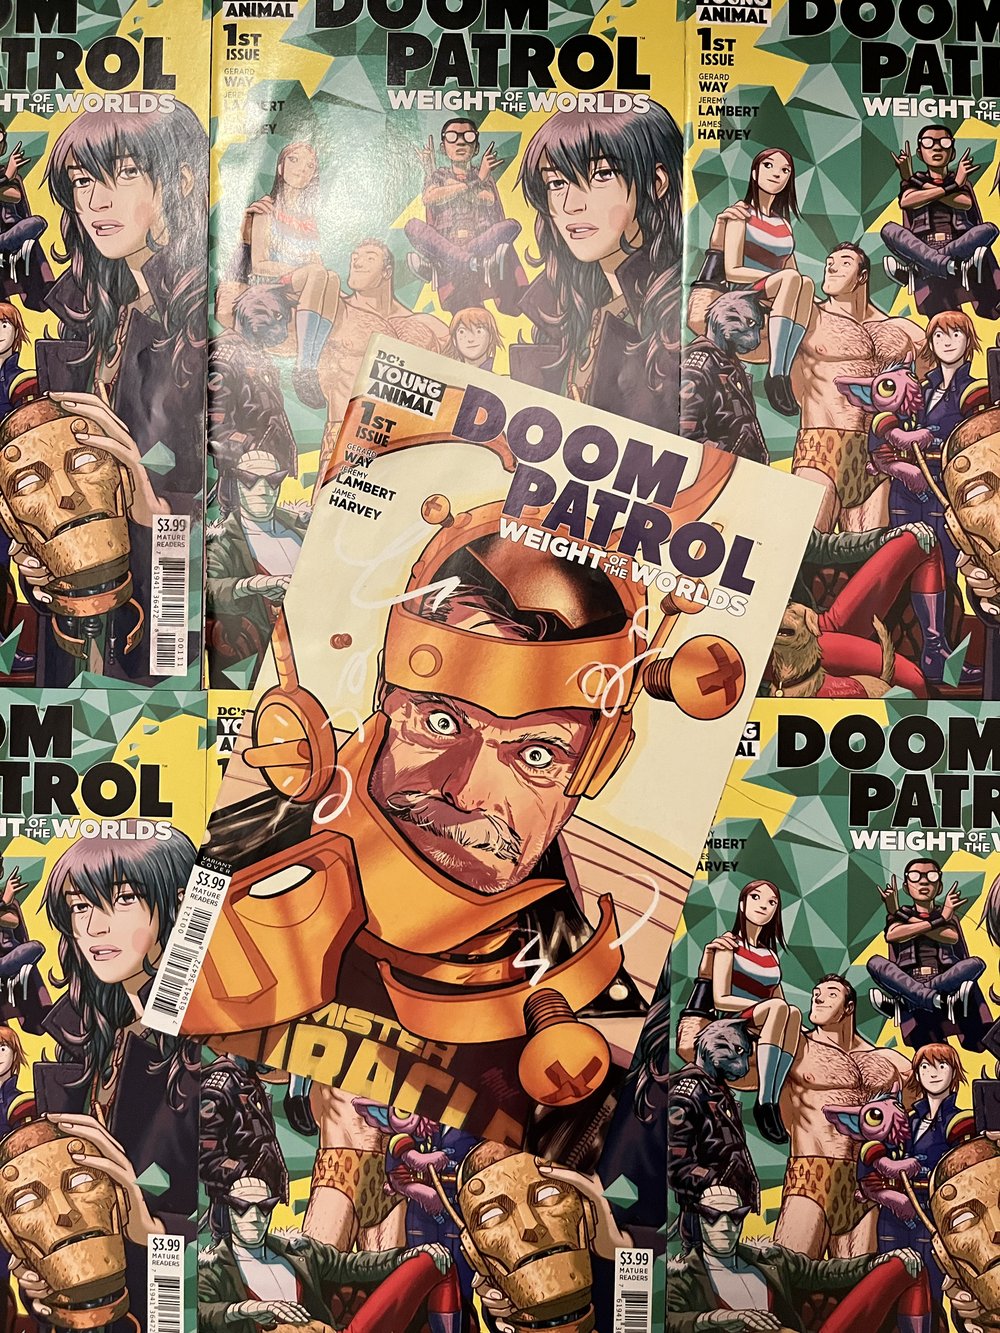 DOOM PATROL: WEIGHT OF THE WORLDS #1 (Signed)